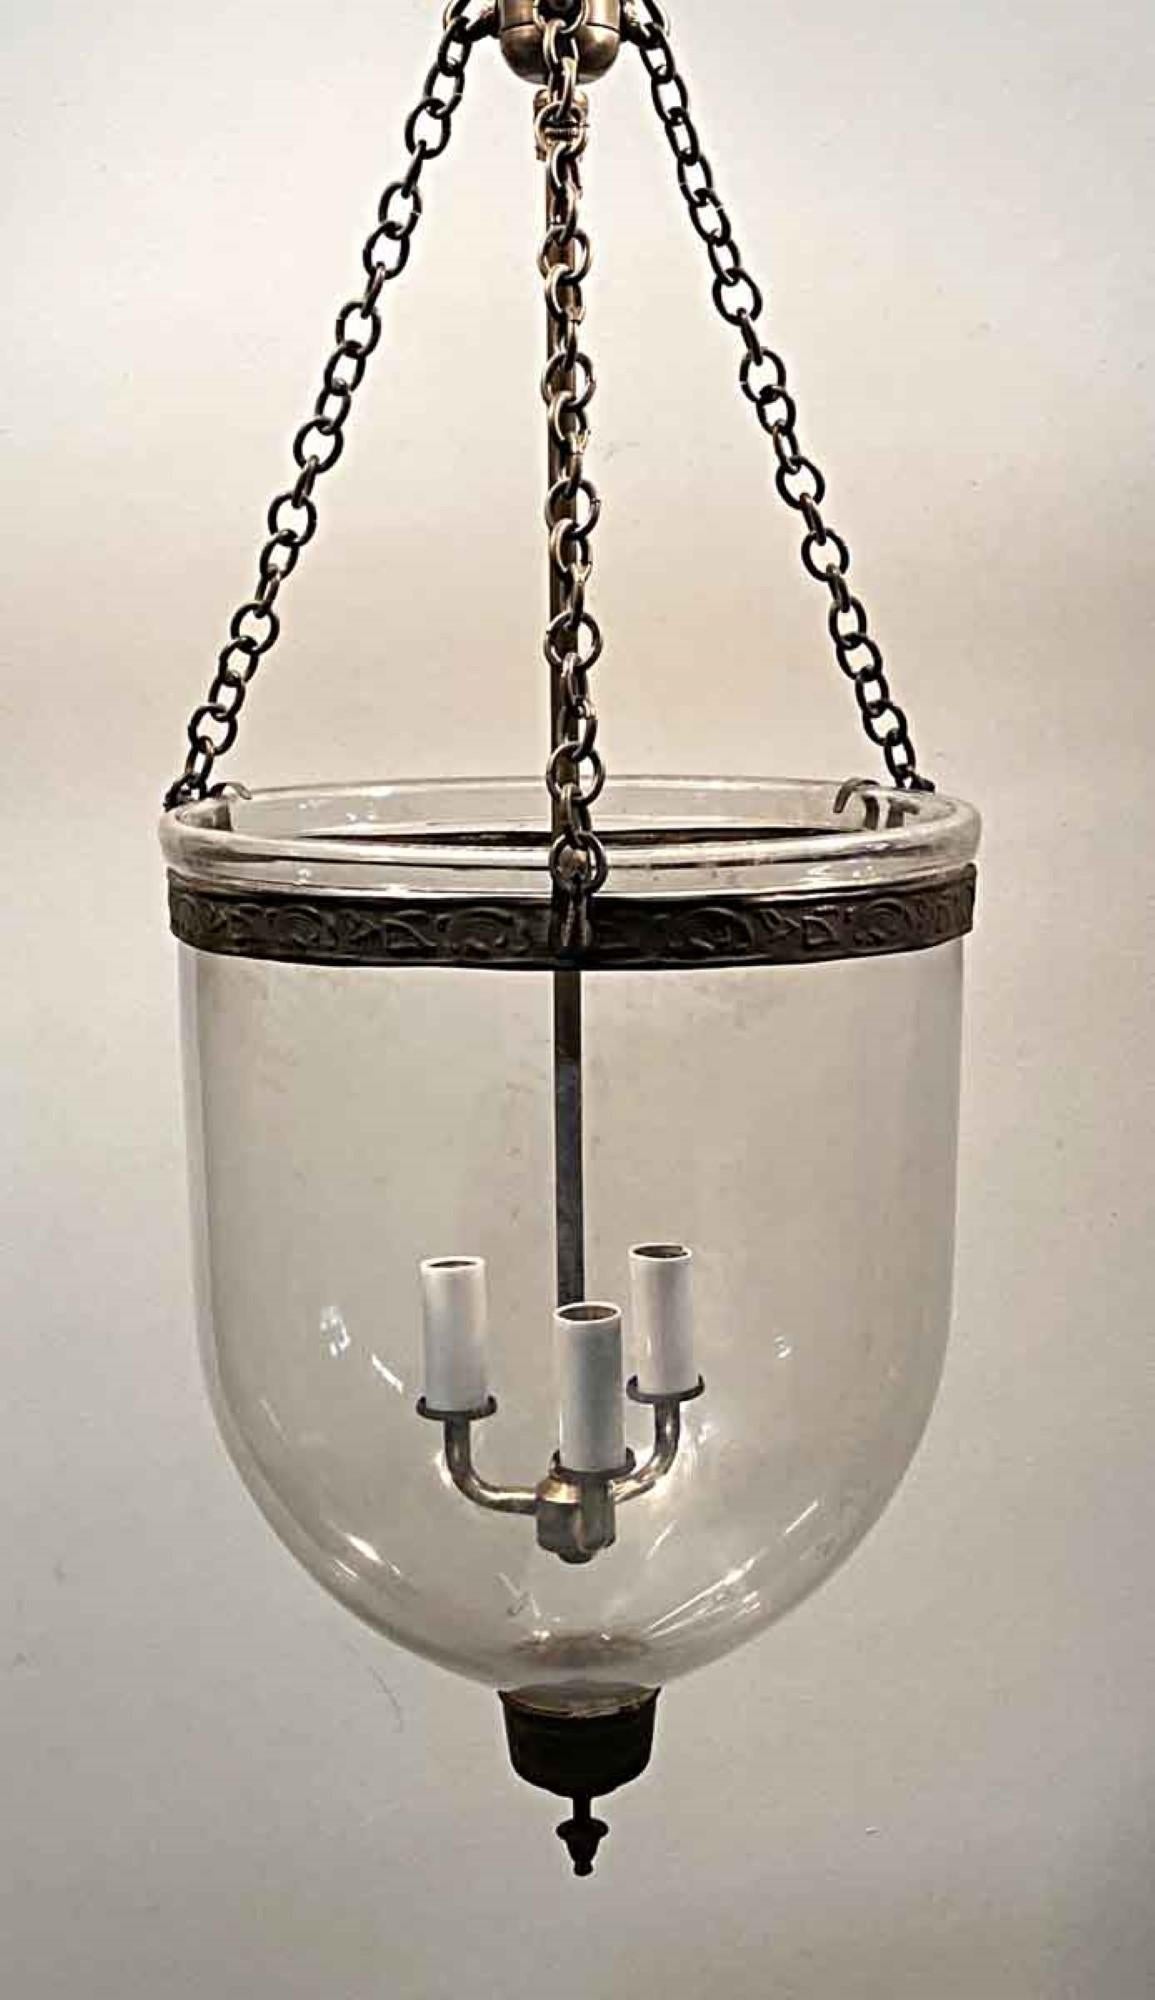 1890s English hand blown glass bell jar pendant lantern with original brass finial. Features new brass hardware and three candelabra lights. This can be seen at our 400 Gilligan St location in Scranton. PA.